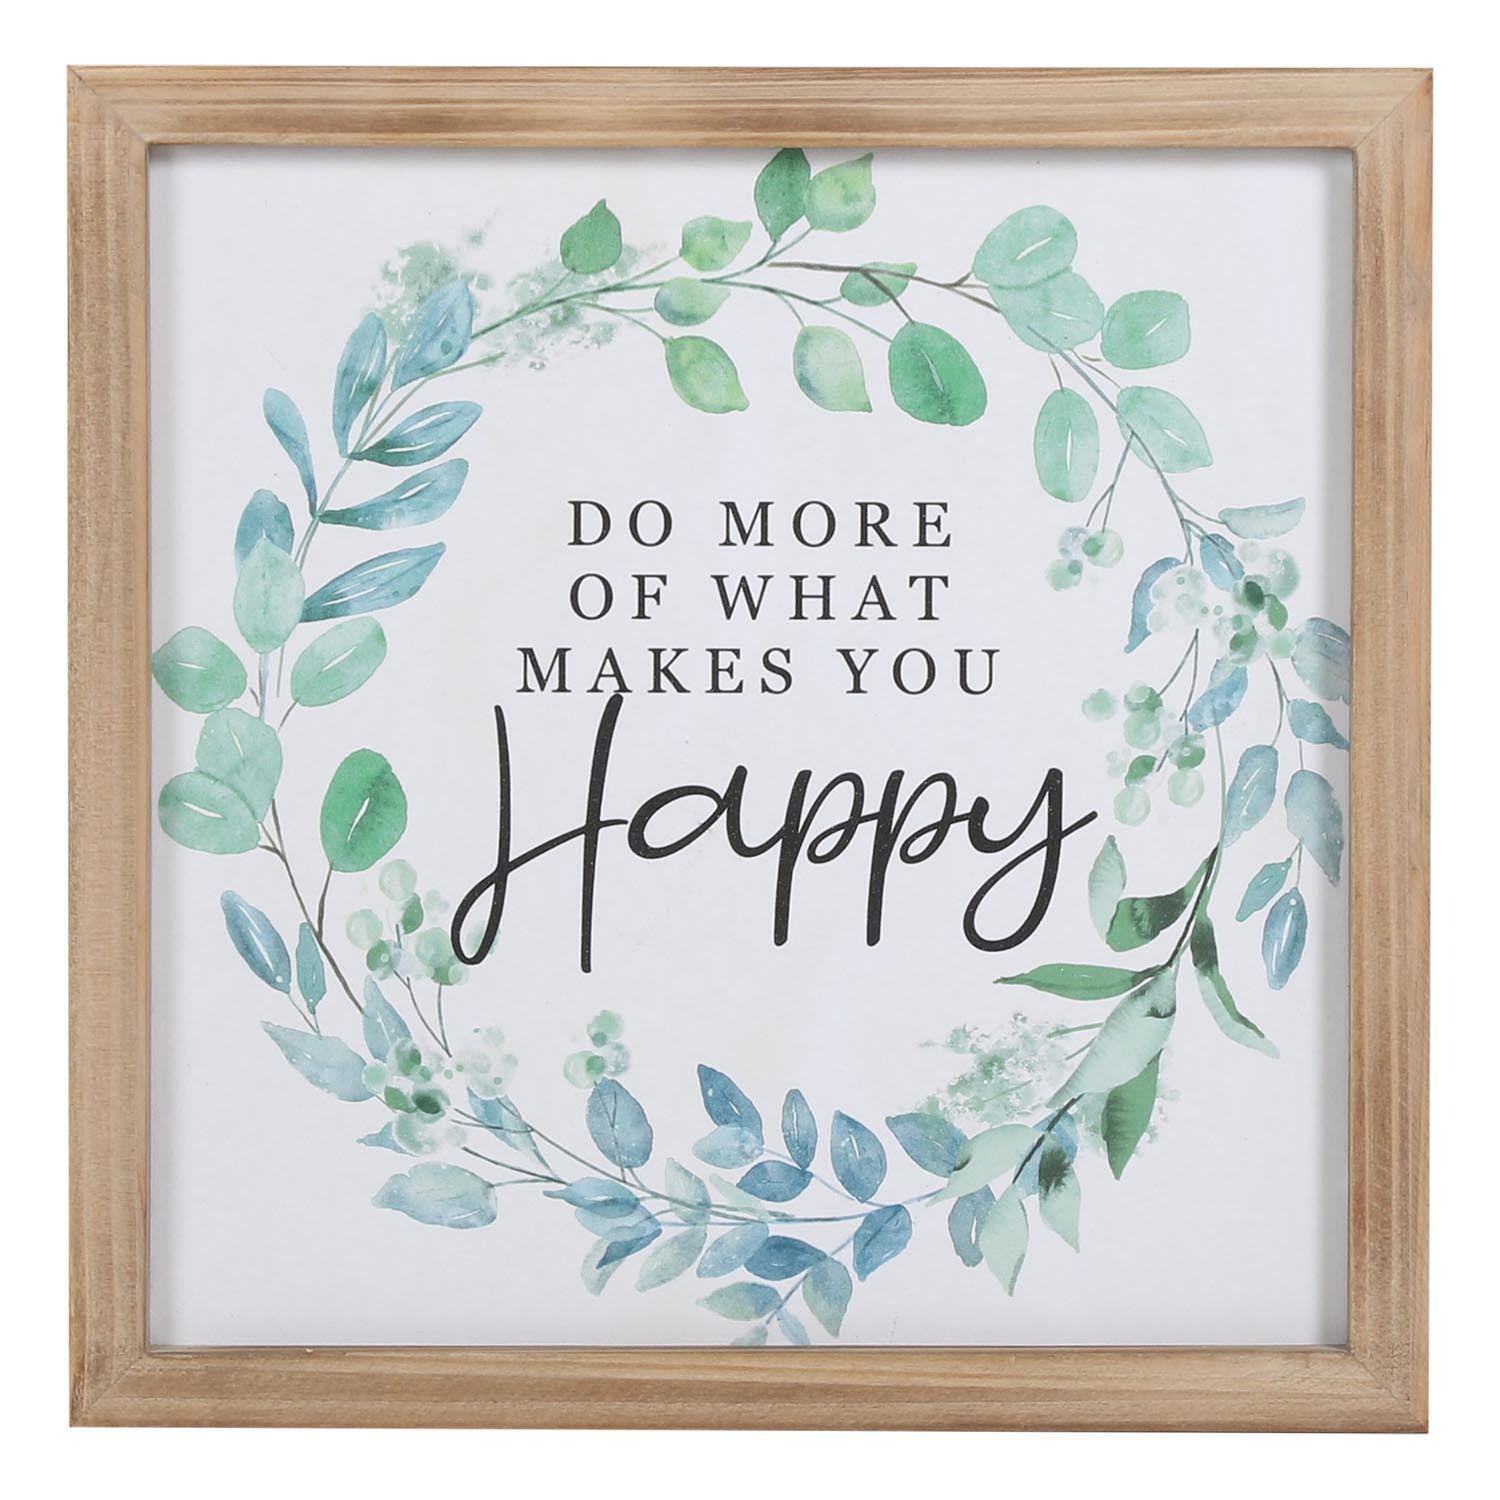 Botanical Happiness Motto Wooden Plaque Image 2